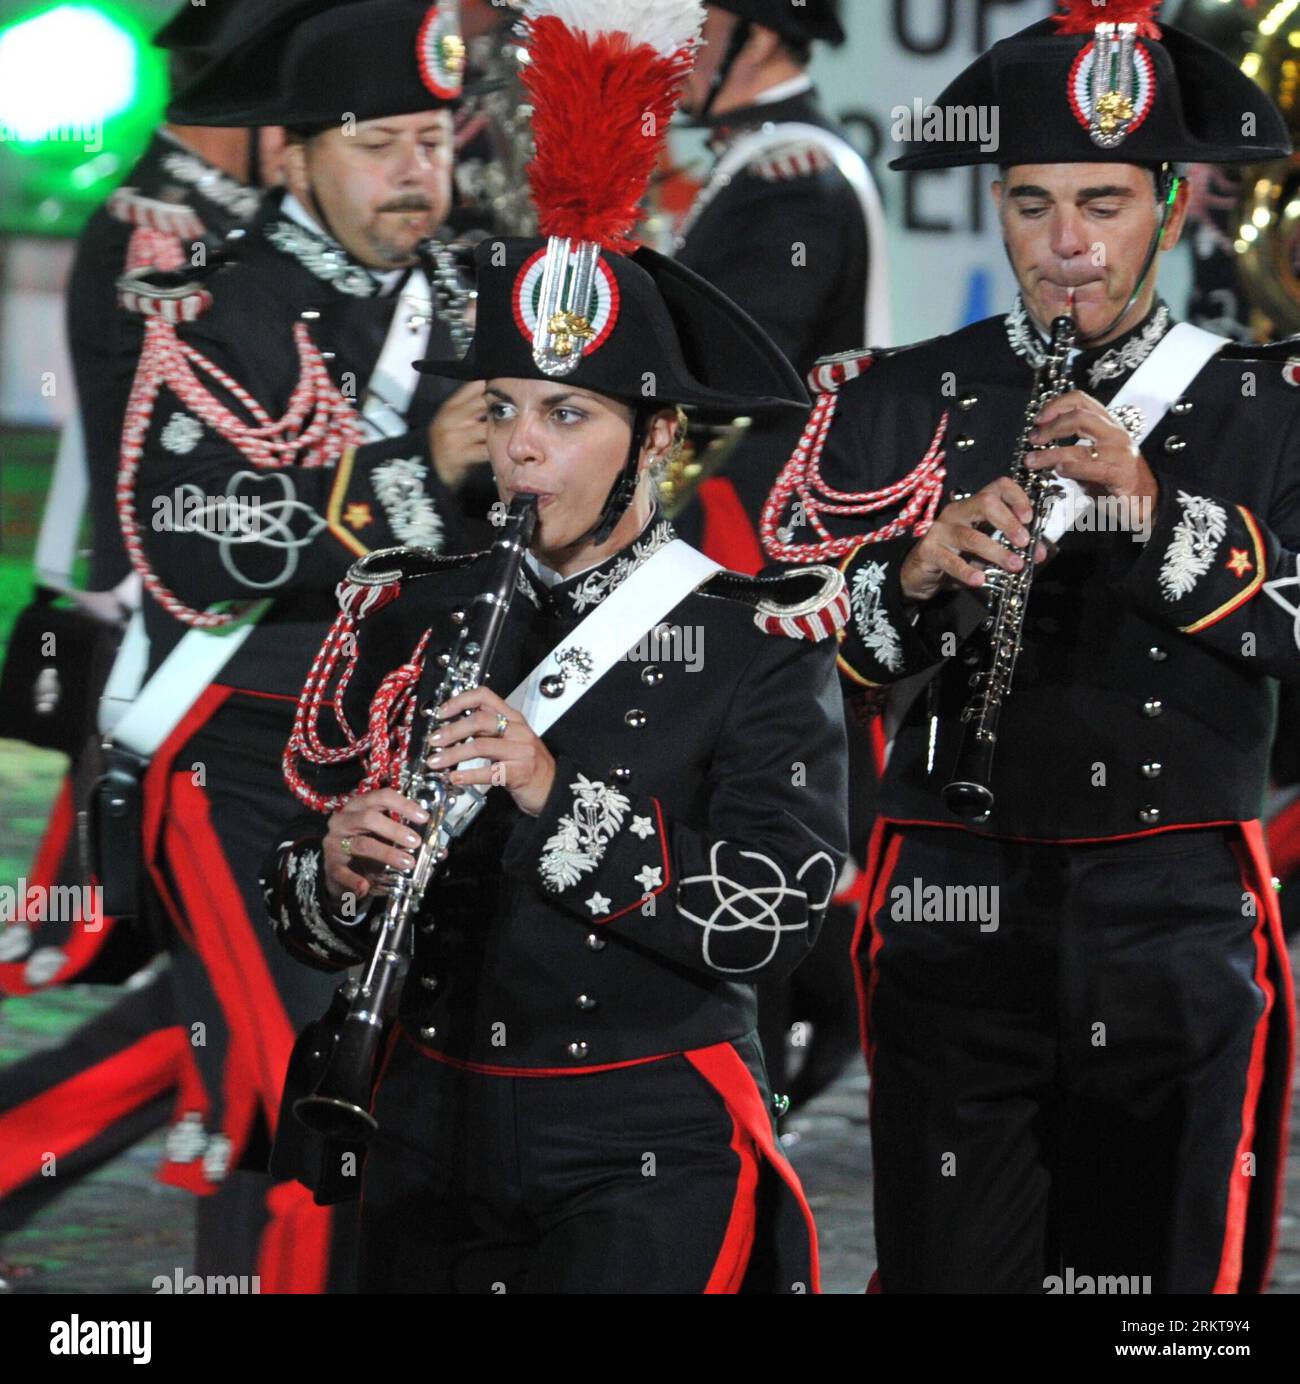 Bildnummer: 58416193  Datum: 01.09.2012  Copyright: imago/Xinhua  MOSCOW,  2012 (Xinhua) -- A team parades during the International Military Music Festival at Red Square in Moscow, on Sept. 1, 2012. Military bands from different countries participate in the annual tattoo. (Xinhua/Pavel) (lr) RUSSIA-MOSCOW-INTERNATIONAL MILITARY MUSIC FESTIVAL PUBLICATIONxNOTxINxCHN Gesellschaft Militär Musik Militärmusik Musikfestival Militärmusikfestival xas x0x premiumd 2012 quadrat     58416193 Date 01 09 2012 Copyright Imago XINHUA Moscow 2012 XINHUA a Team Parades during The International Military Music F Stock Photo